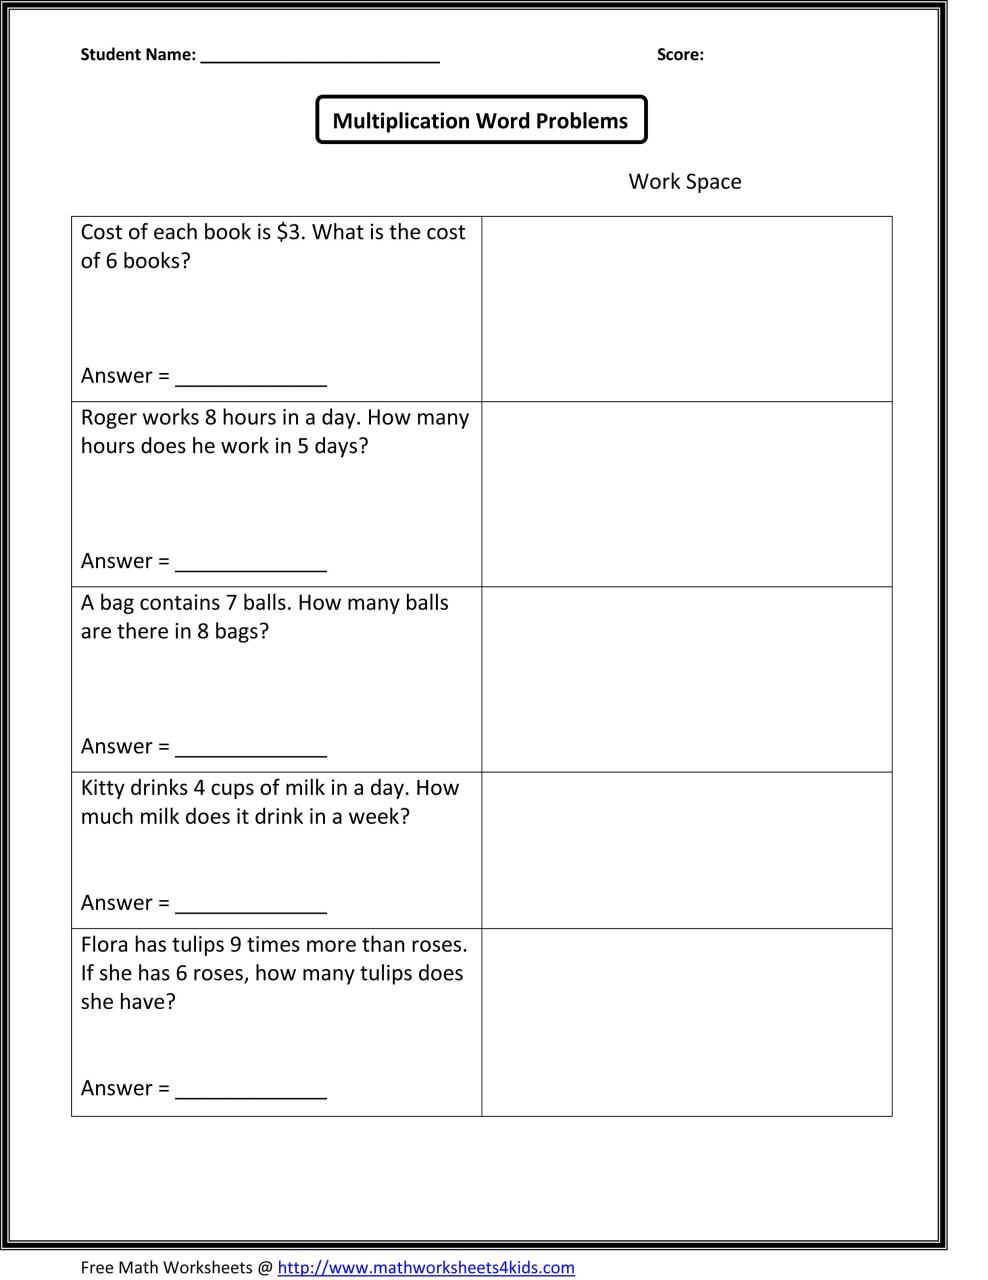 Word Problems Worksheets 2nd Grade